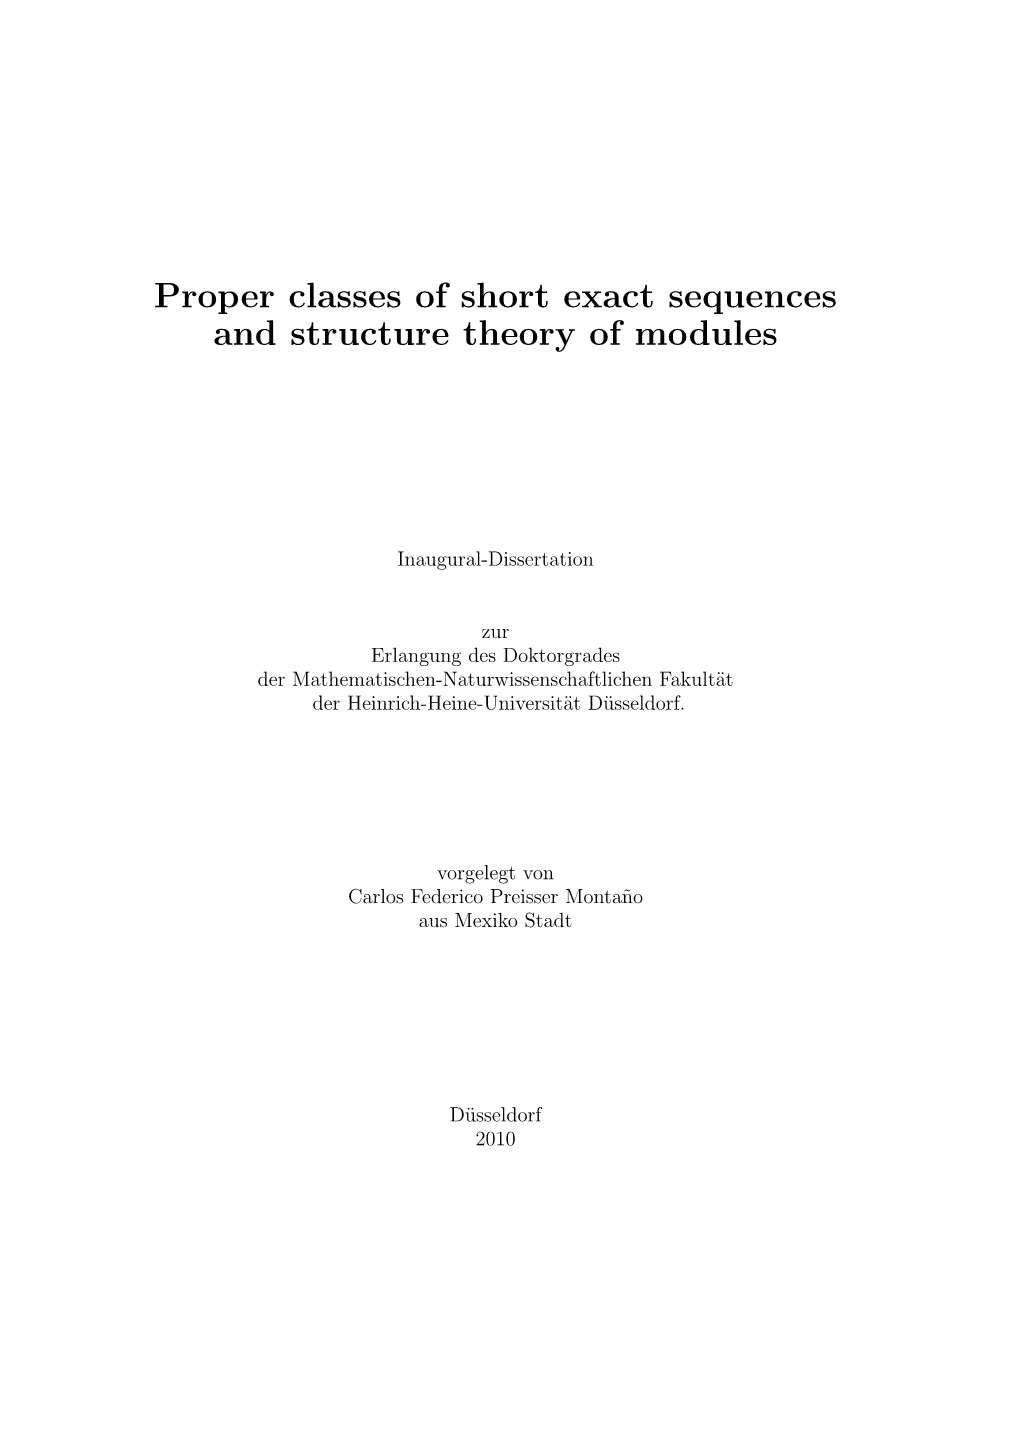 Proper Classes of Short Exact Sequences and Structure Theory of Modules